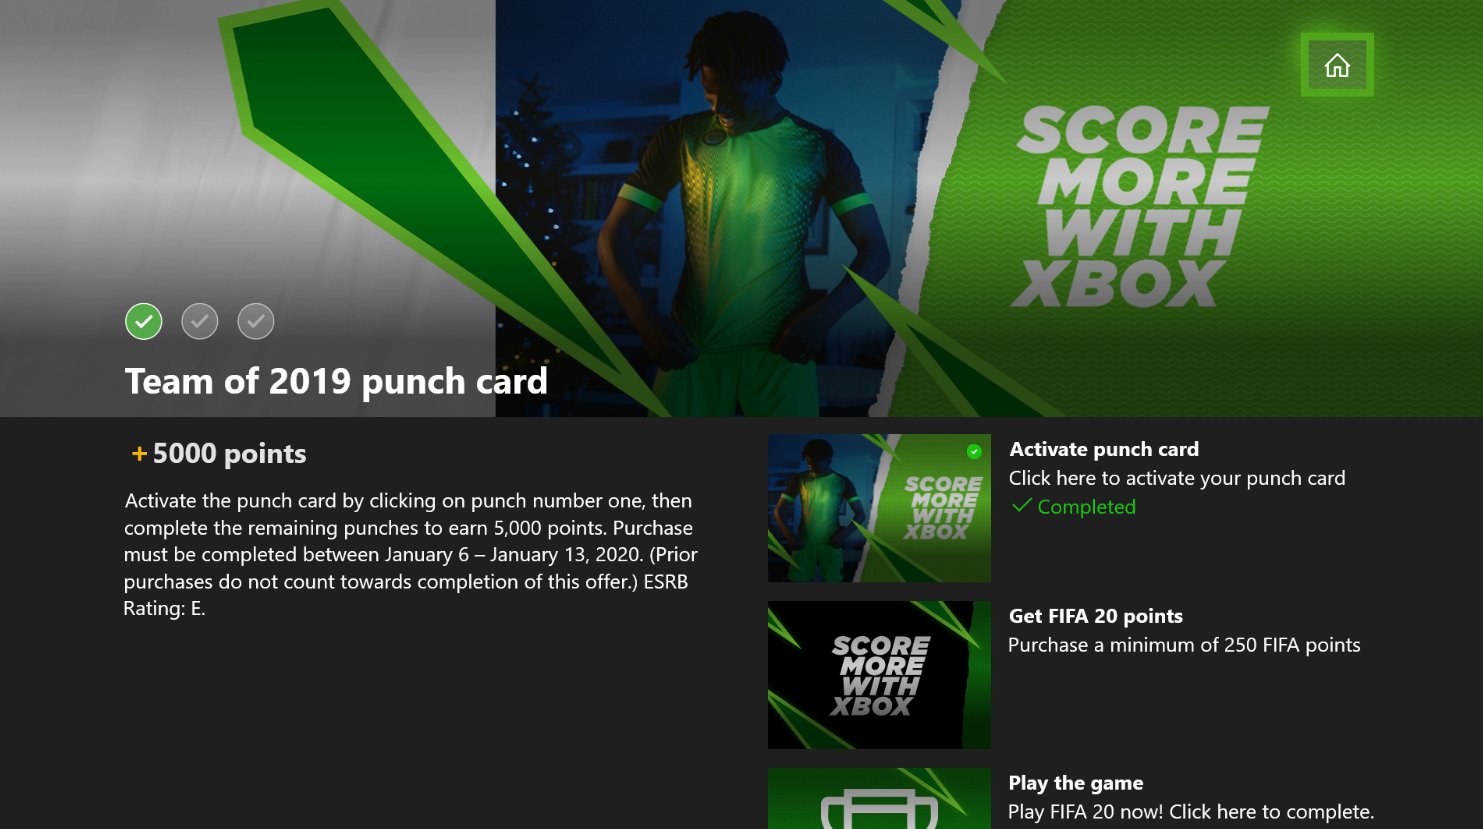 Xbox removes achievement requirement for EA Play Rewards punch card